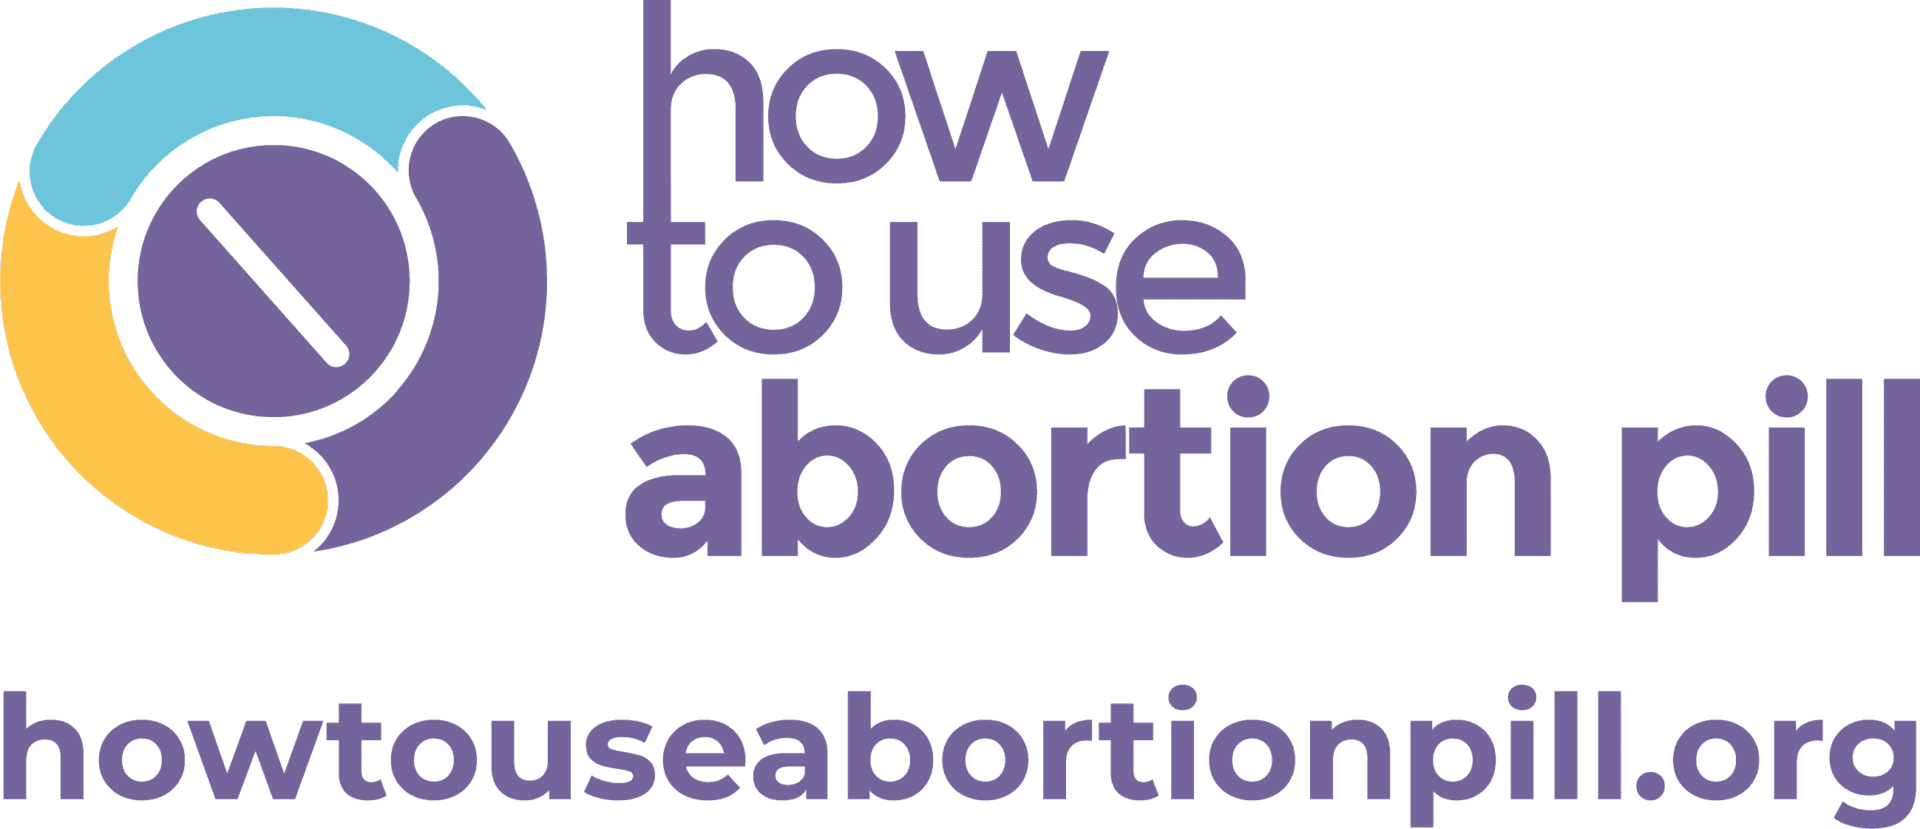 how to use abortion pill logo